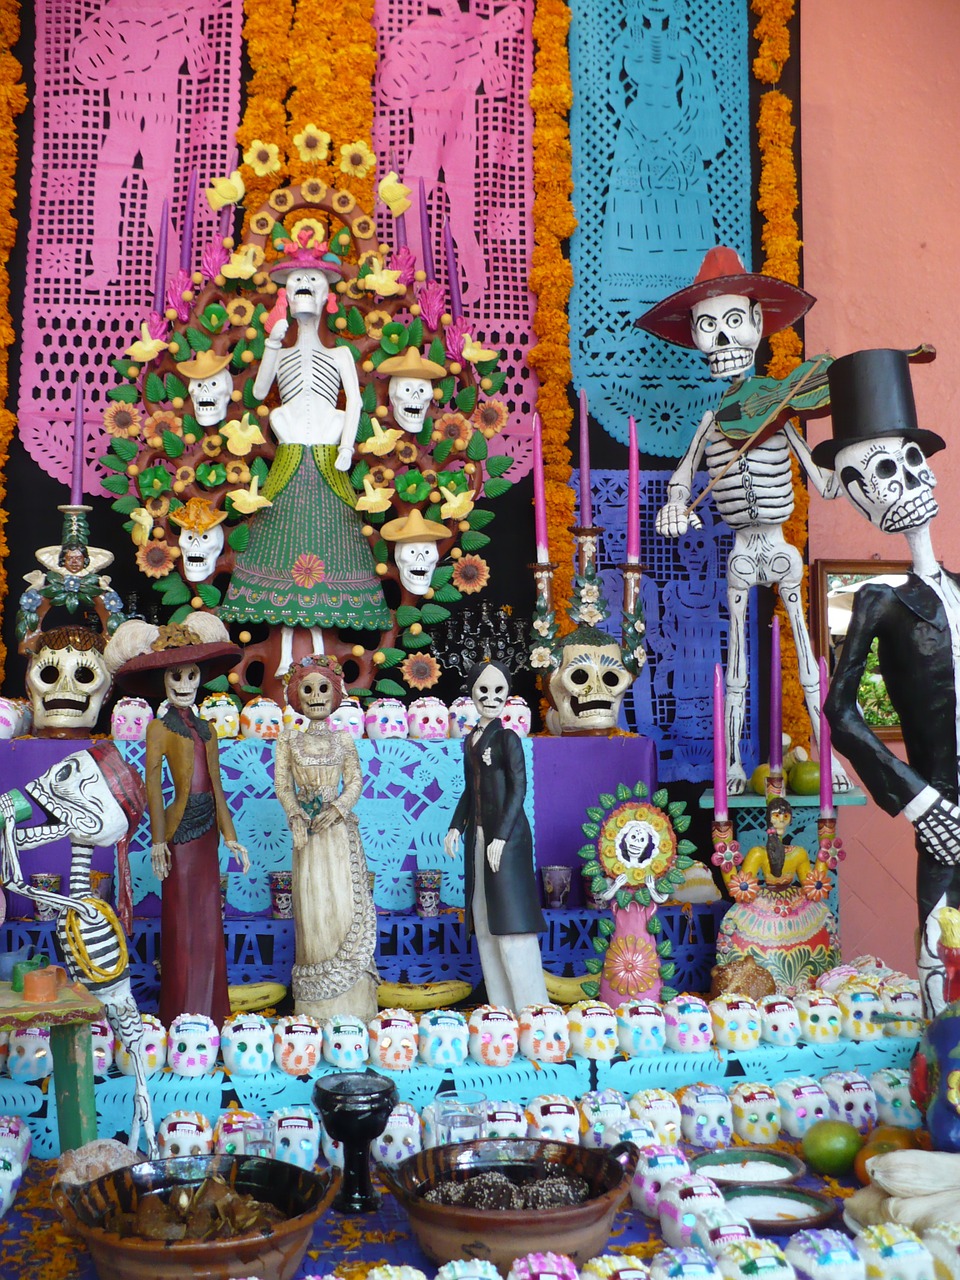 tradition mexico offering free photo